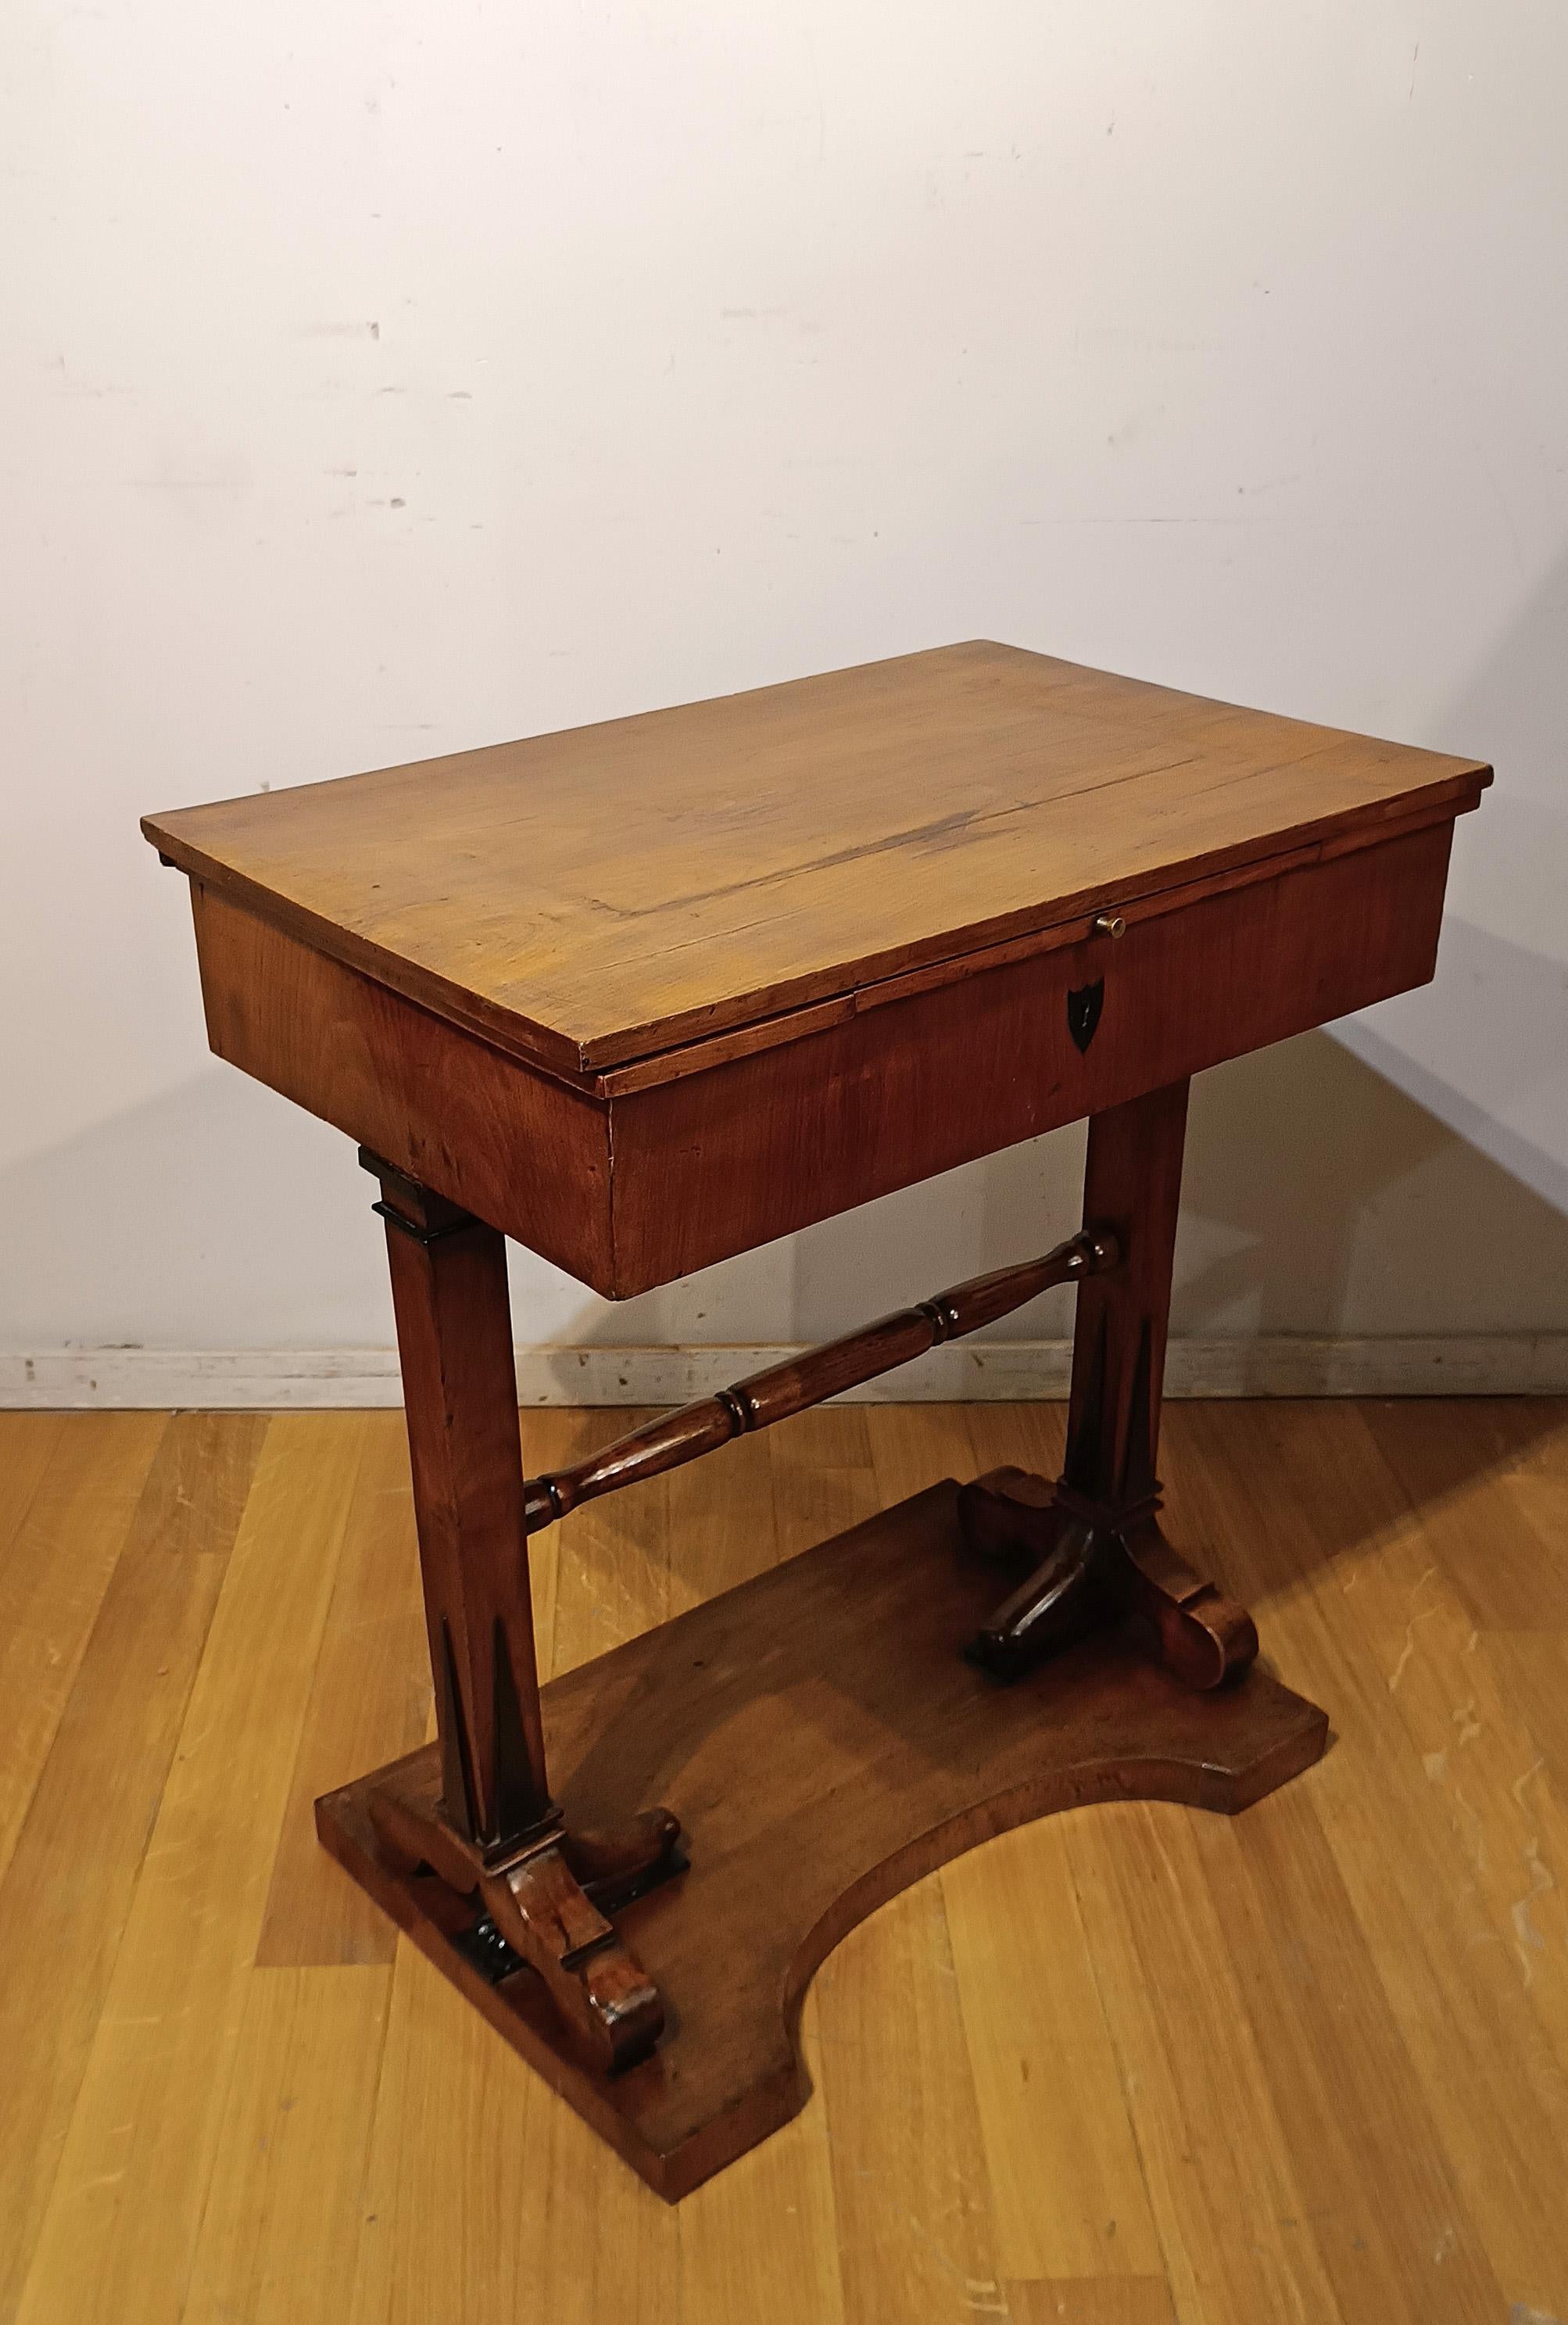 Italian EARLY 19th CENTURY SMALL WORKING TABLE For Sale